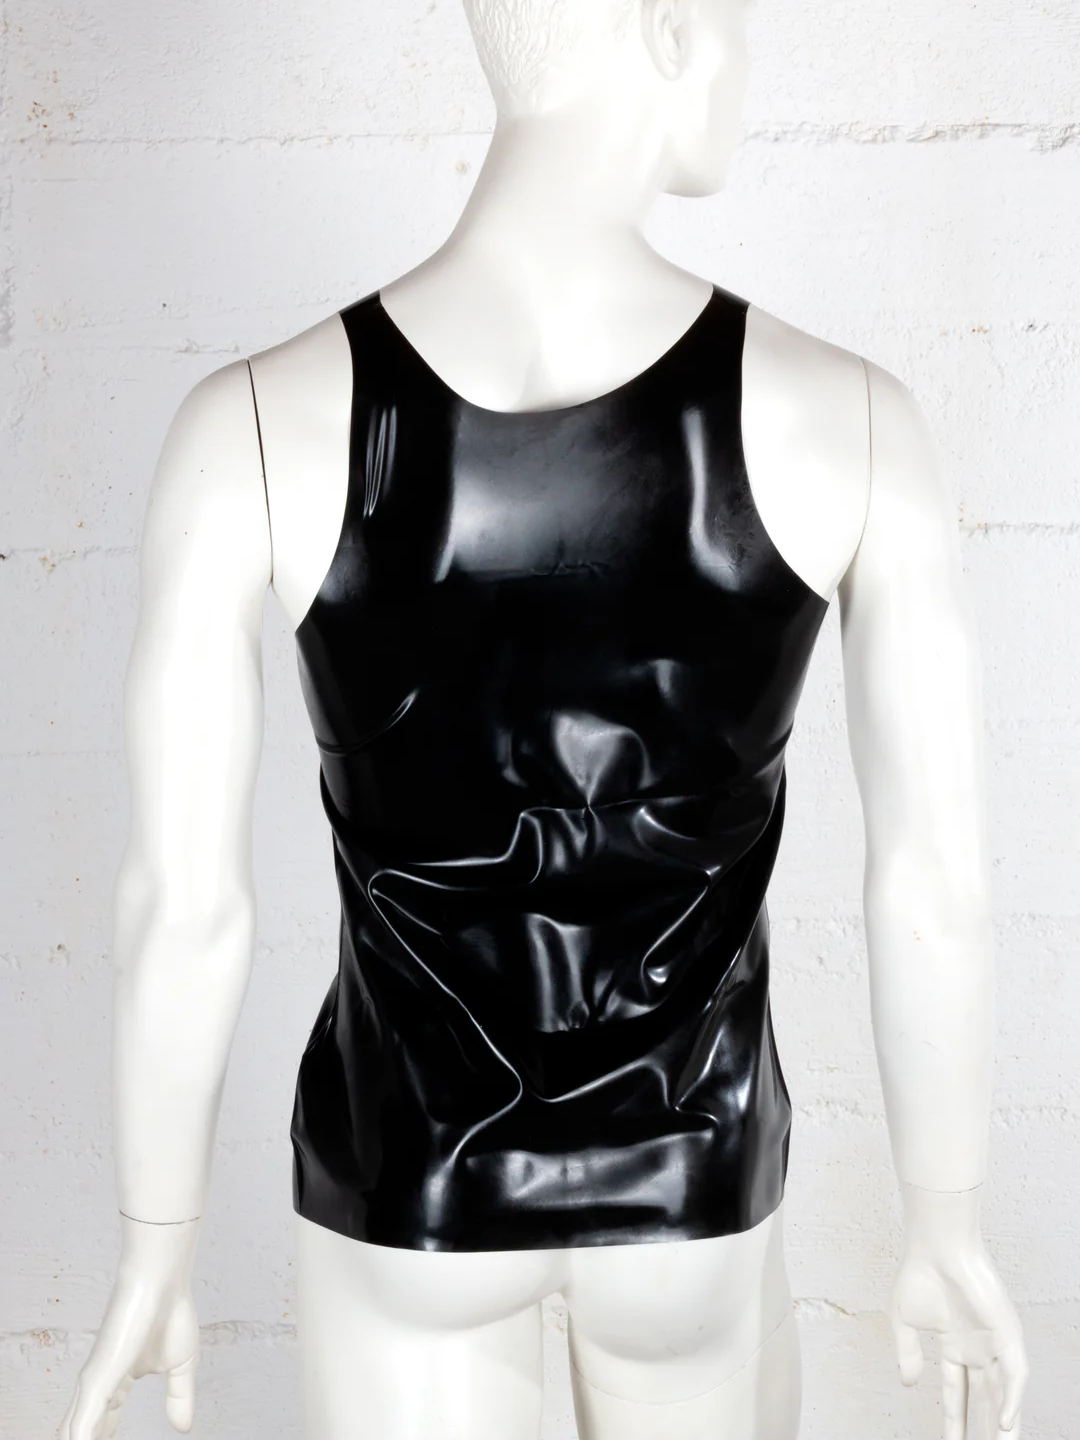 Seamless Moulded Latex Men's Tank